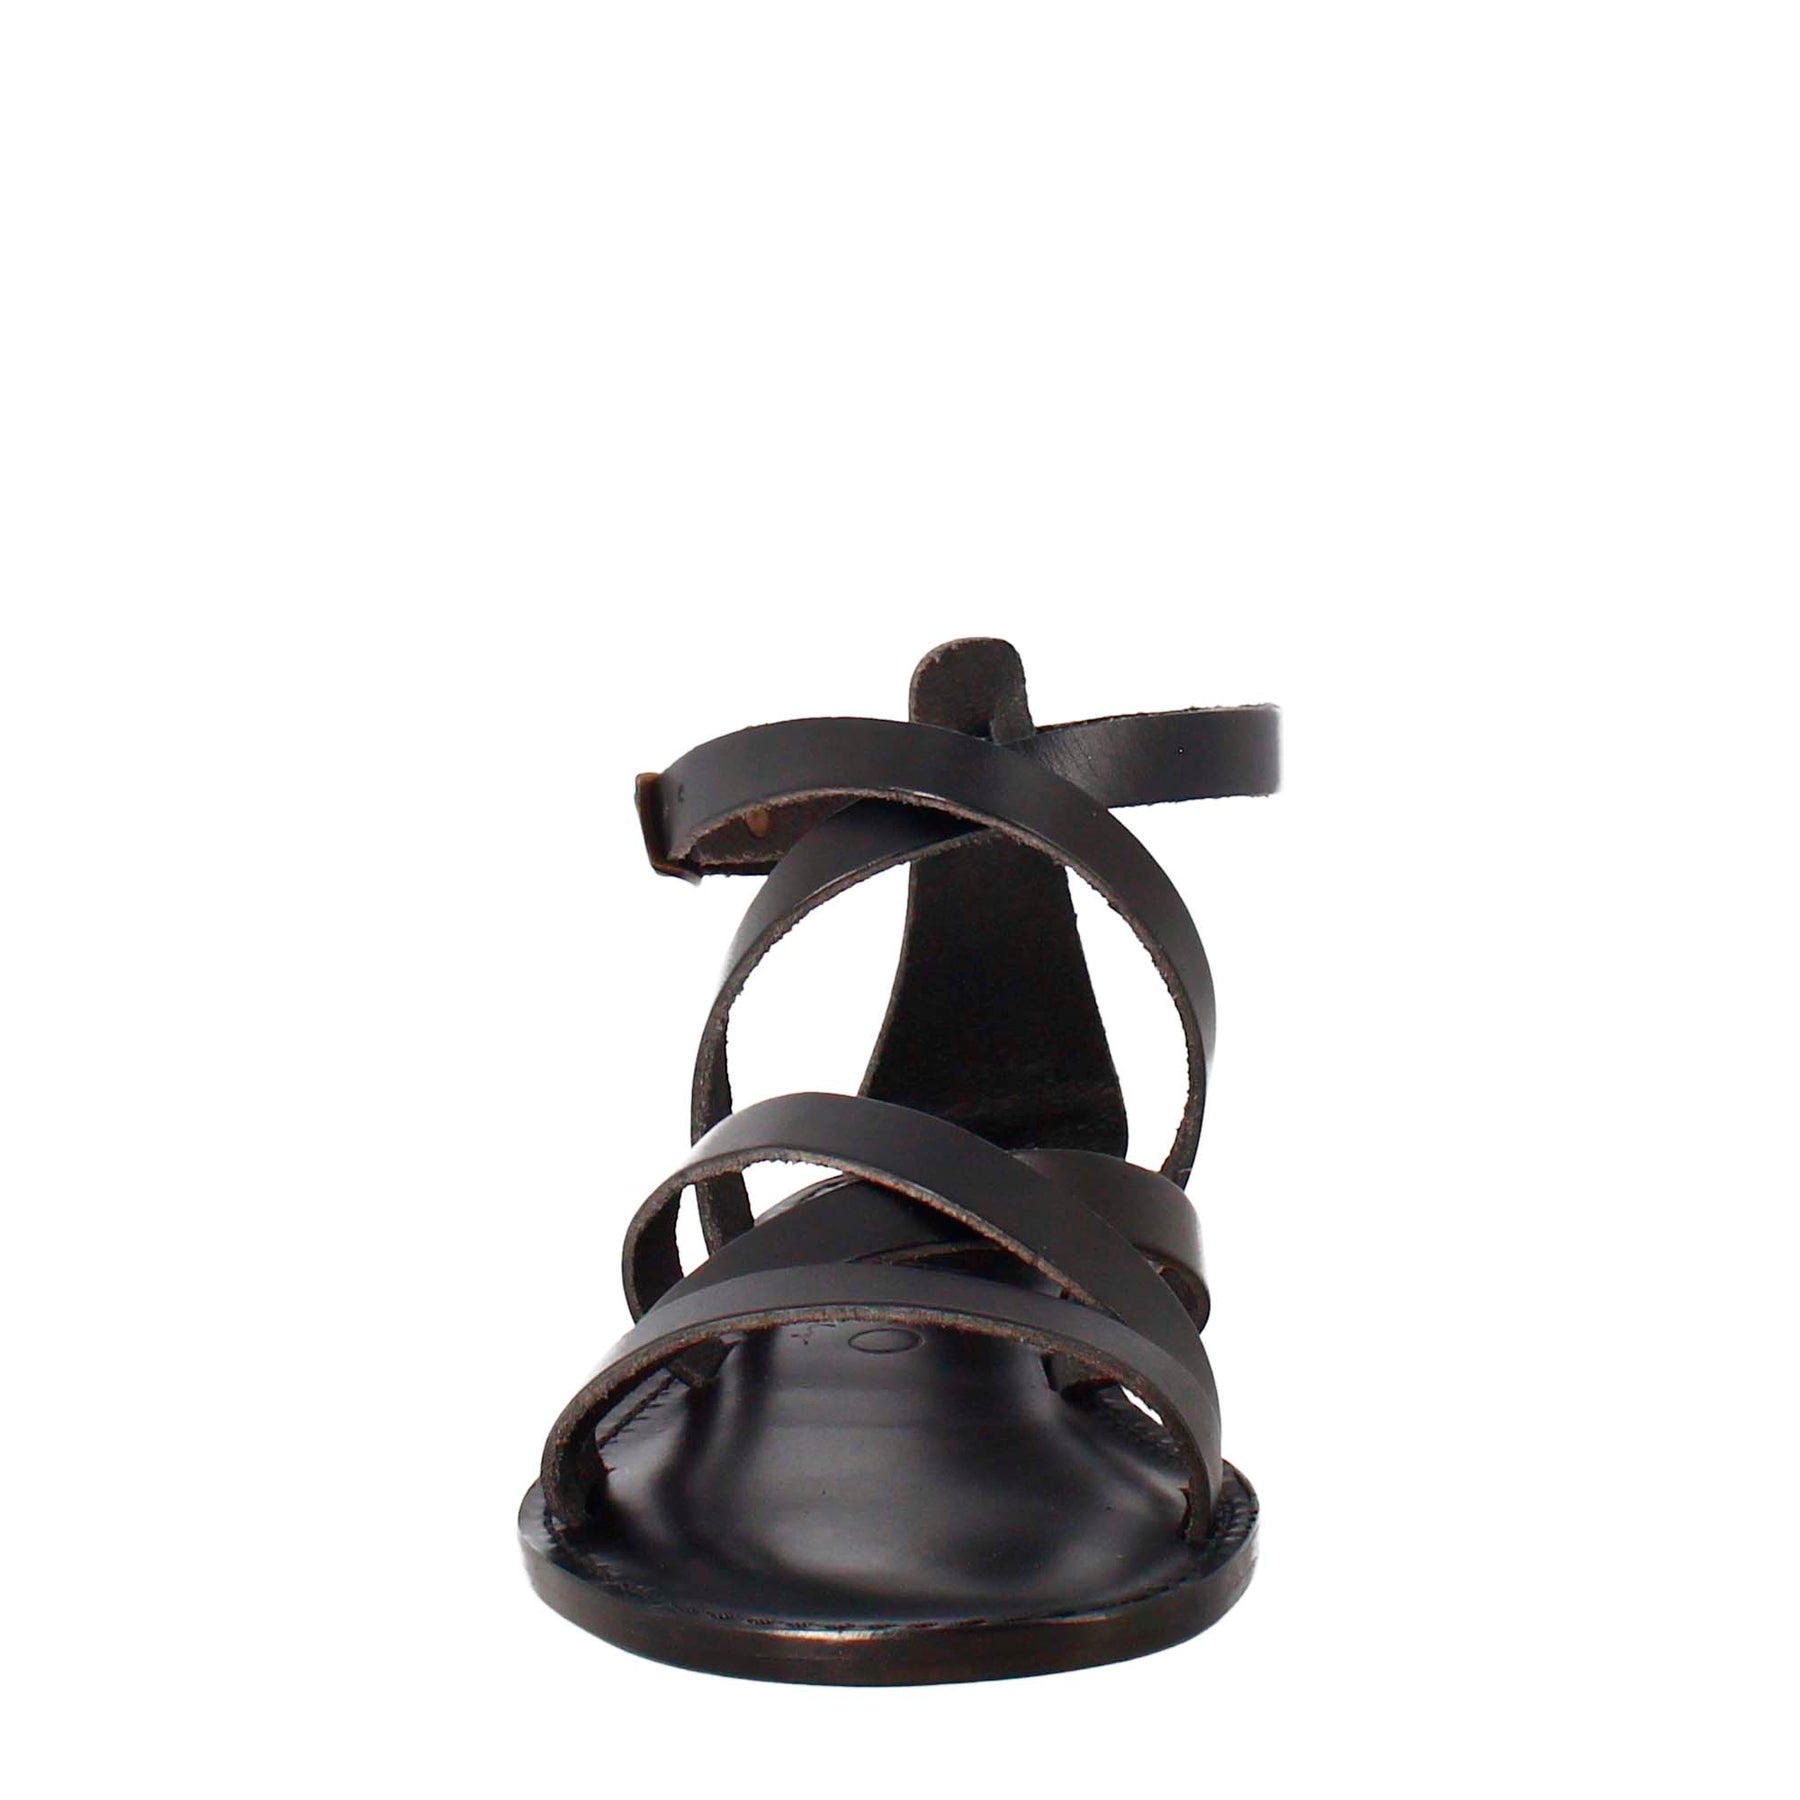 Sinfonia women's sandals in ancient Roman style in black leather 